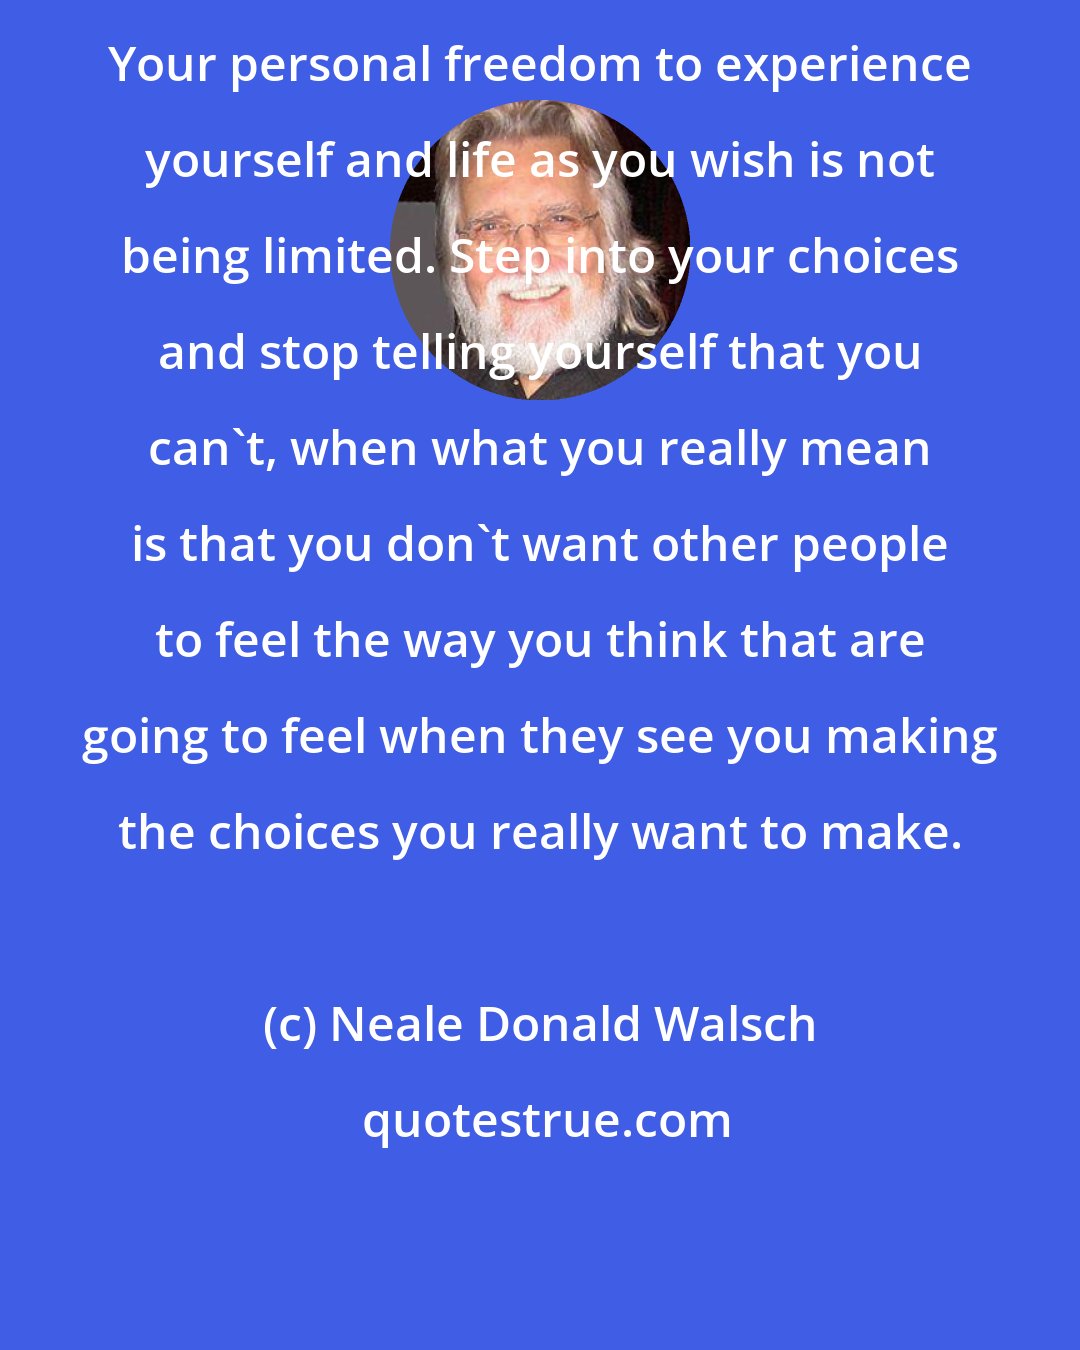 Neale Donald Walsch: Your personal freedom to experience yourself and life as you wish is not being limited. Step into your choices and stop telling yourself that you can't, when what you really mean is that you don't want other people to feel the way you think that are going to feel when they see you making the choices you really want to make.